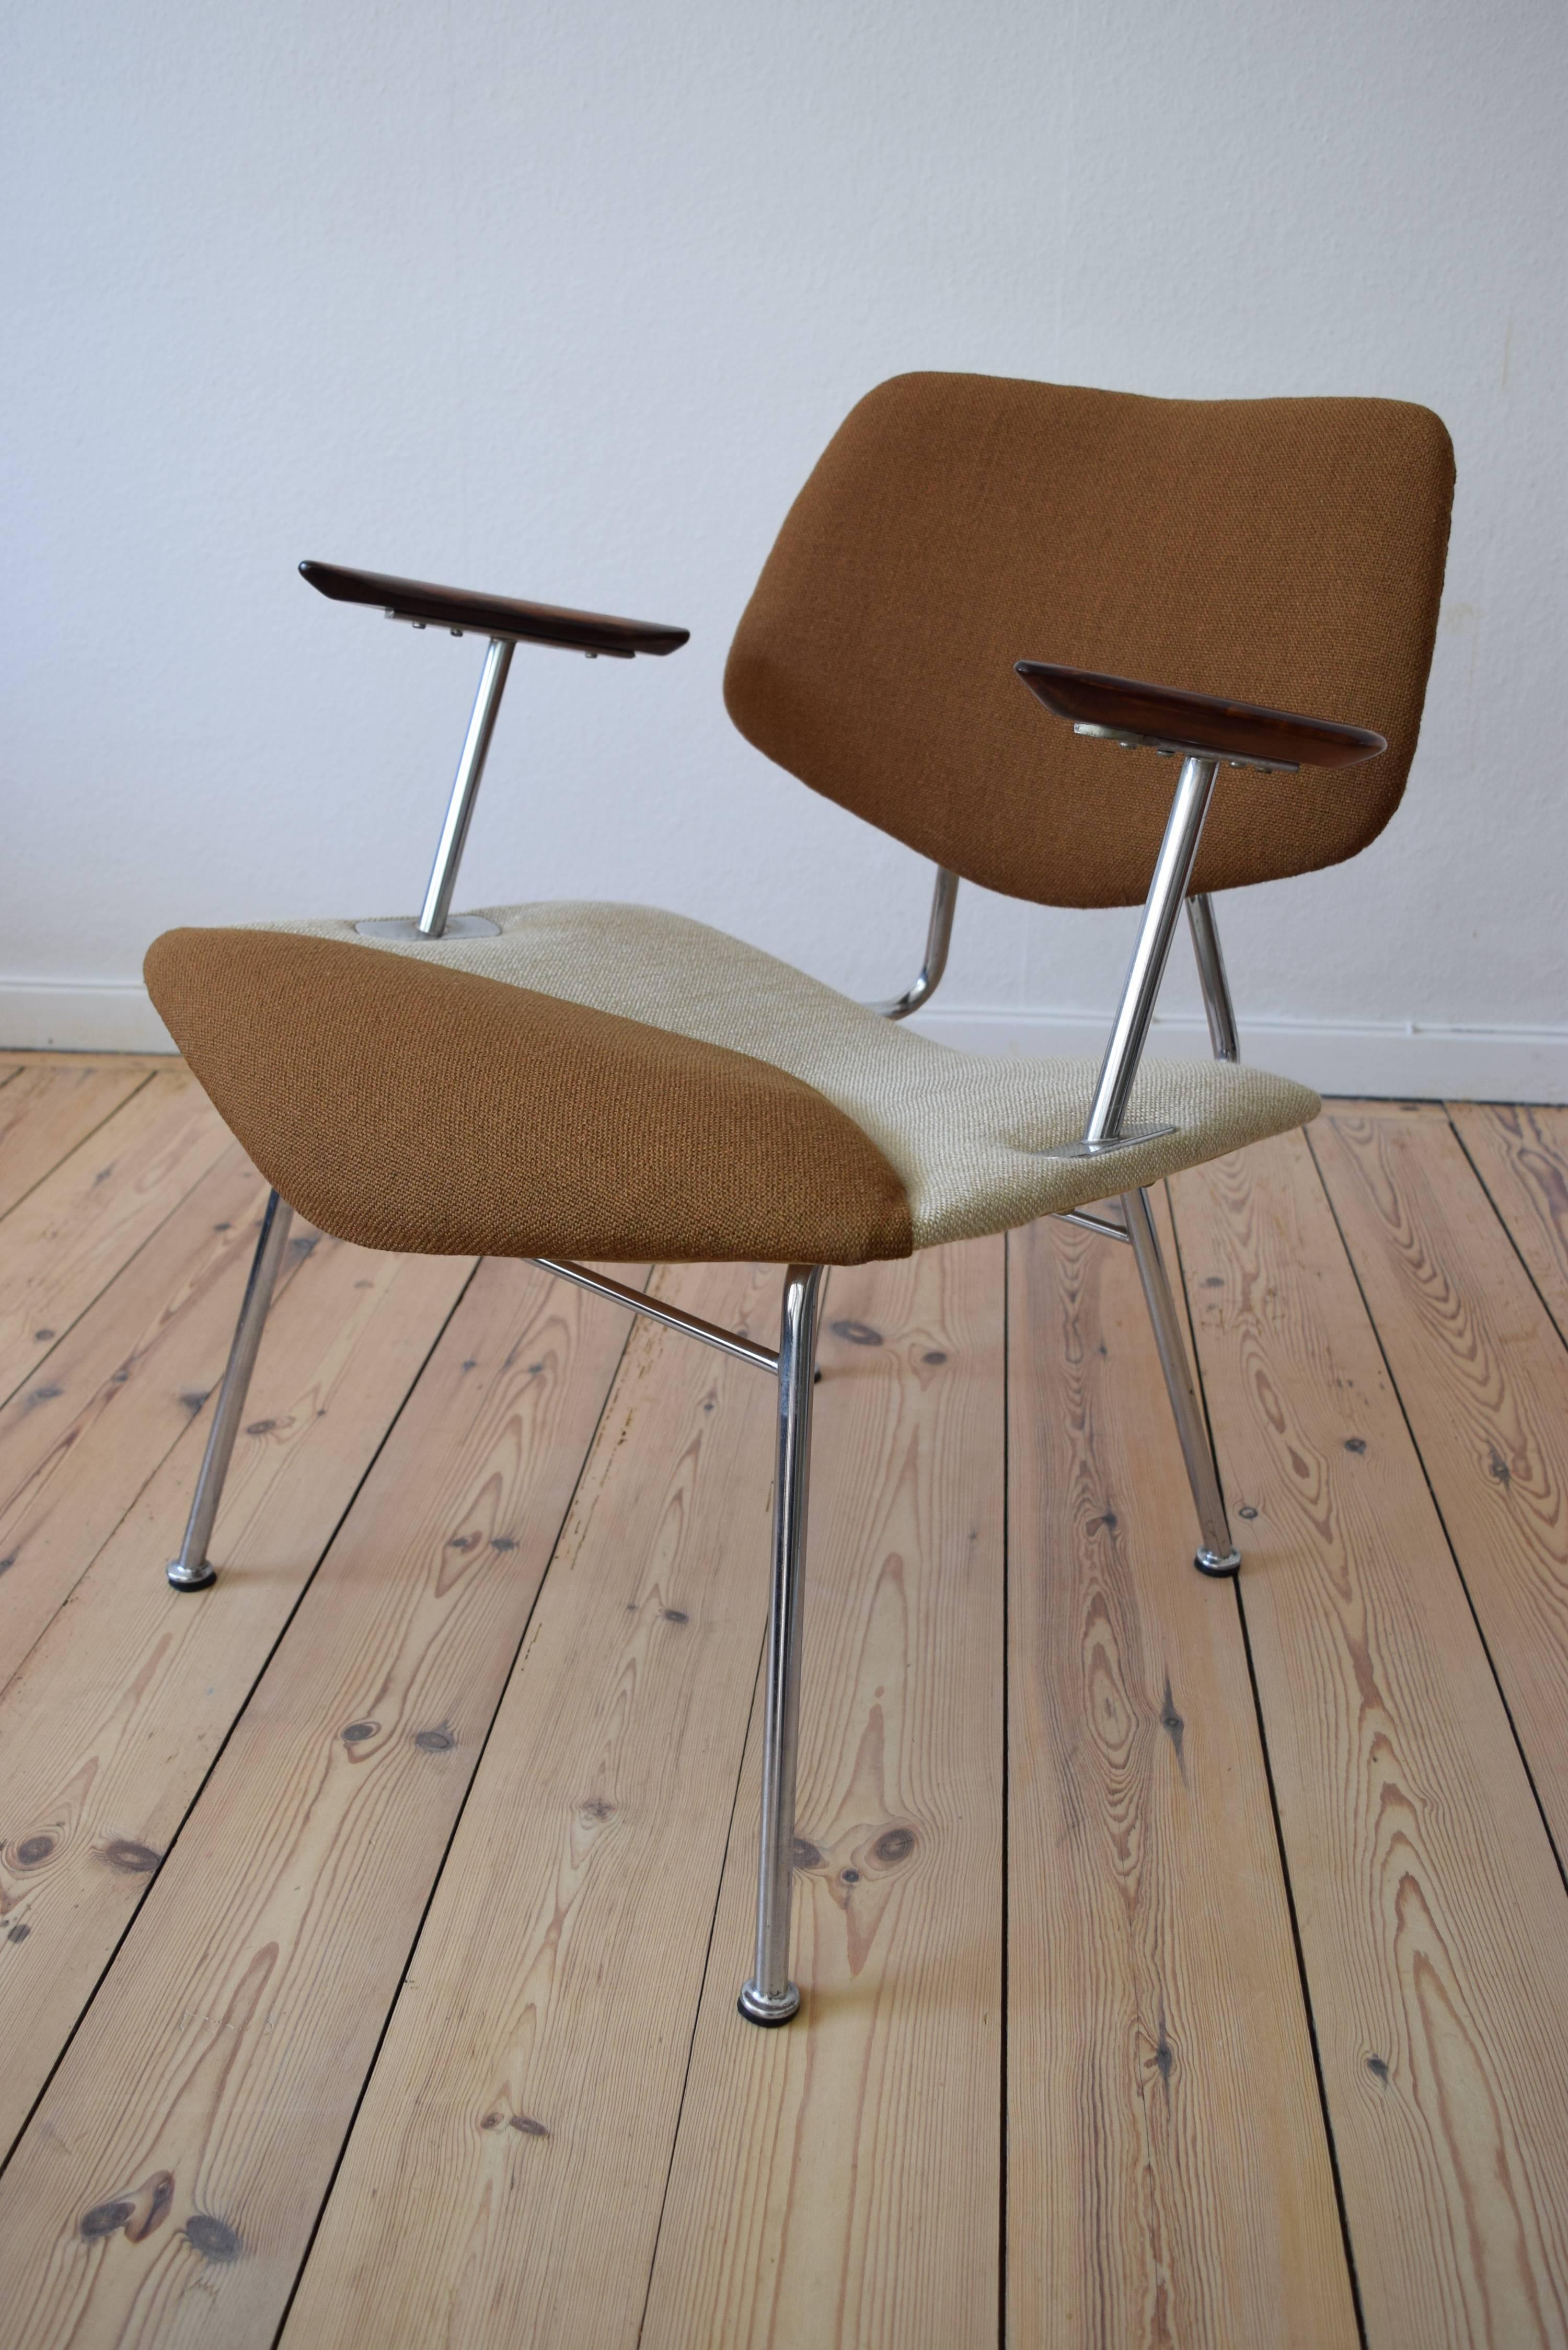 This pair of studio chairs were designed by Vermund Larsen for V.L. Møbler in Denmark during the 1960s. These chairs feature a swivel back, original wool two-tone upholstery and solid rosewood armrests. They are marked on the underside as being